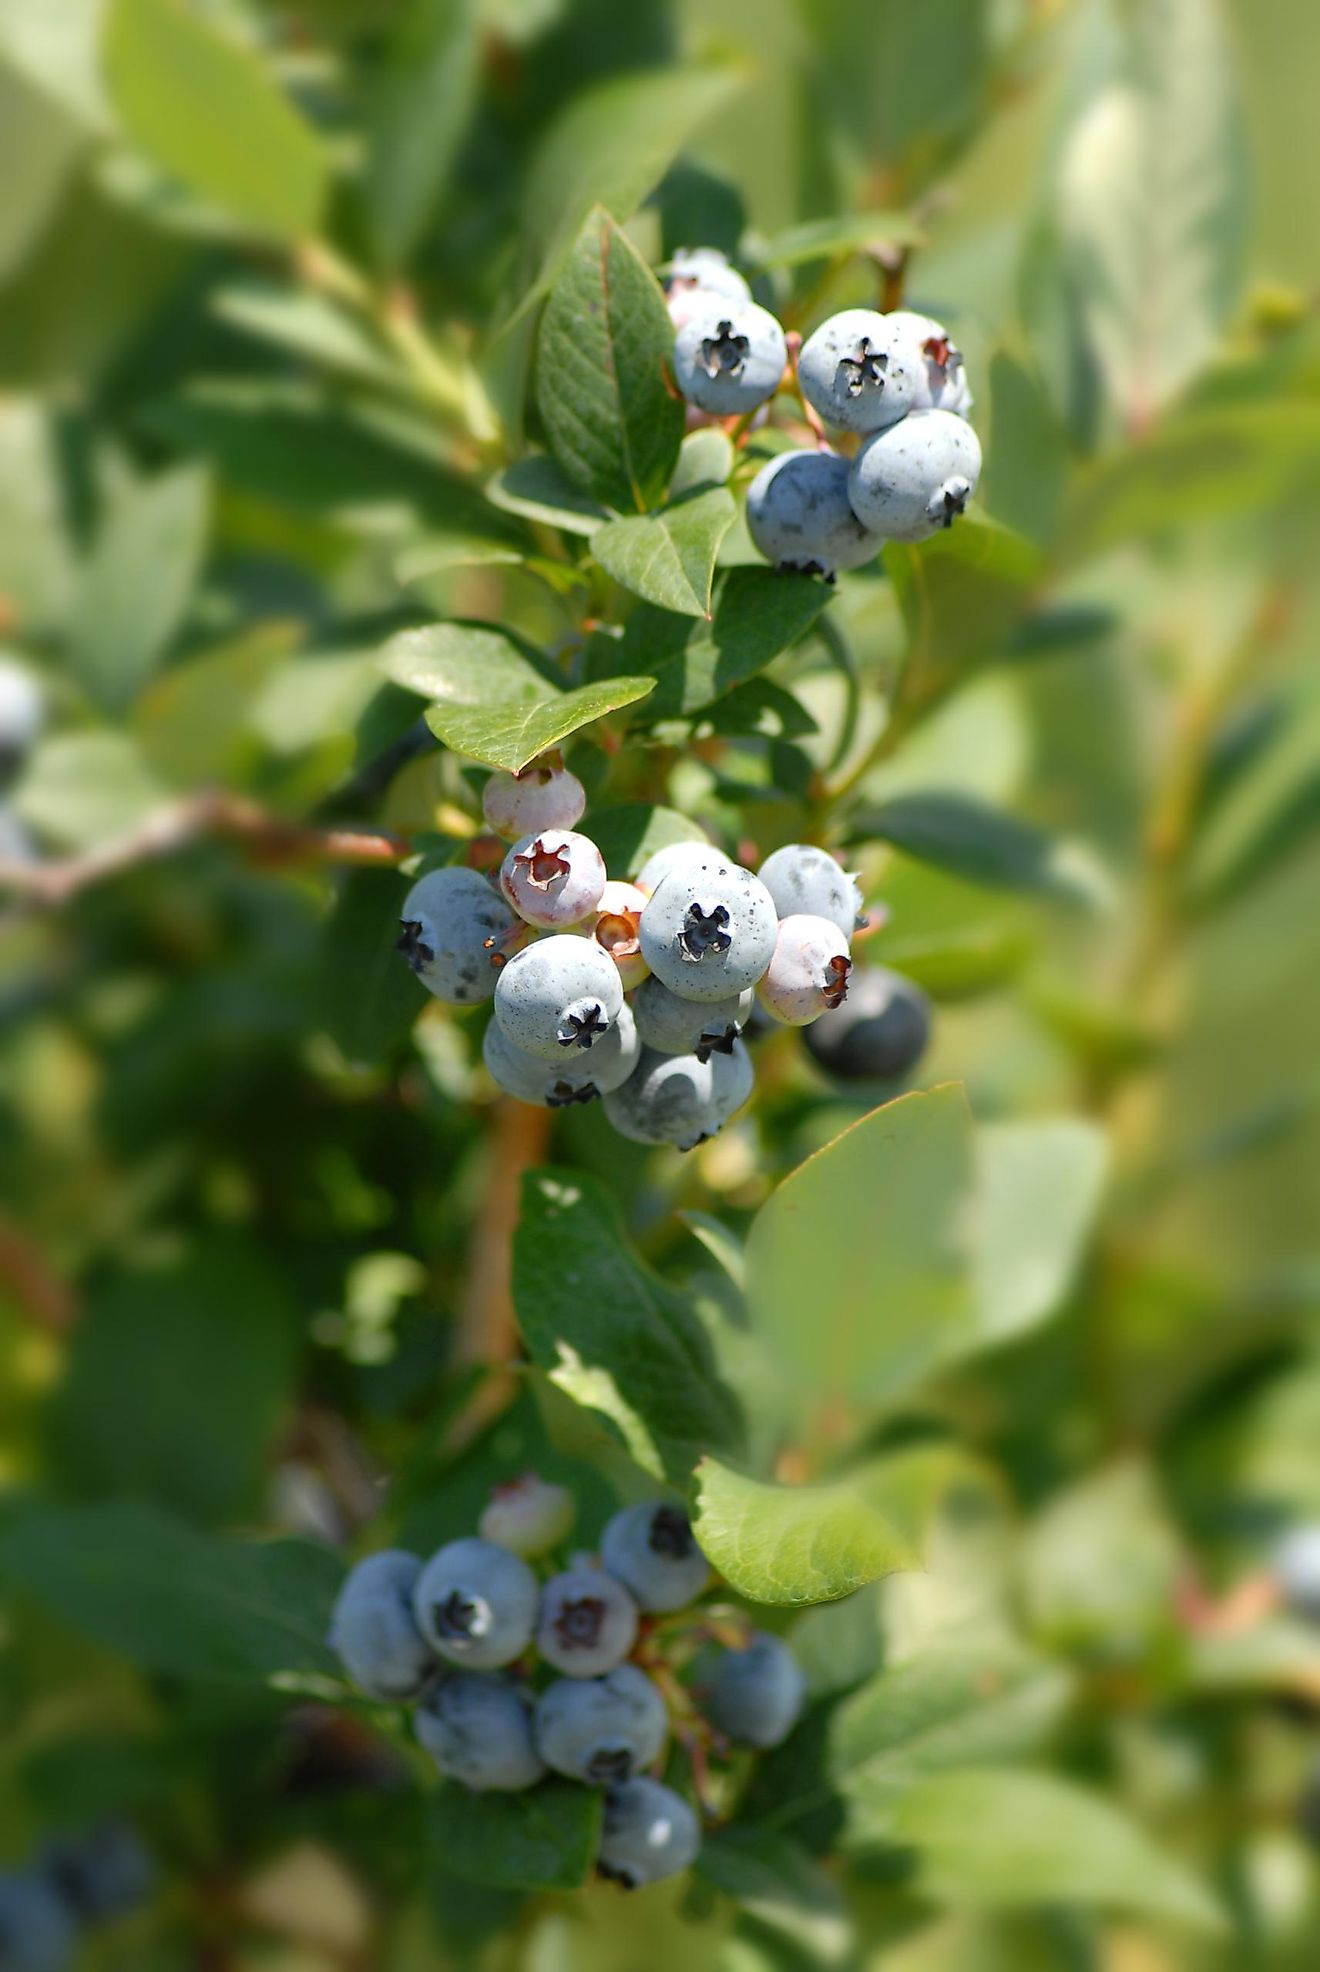 Bushes full of ripe blueberries on a farm in the US state of Michigan.